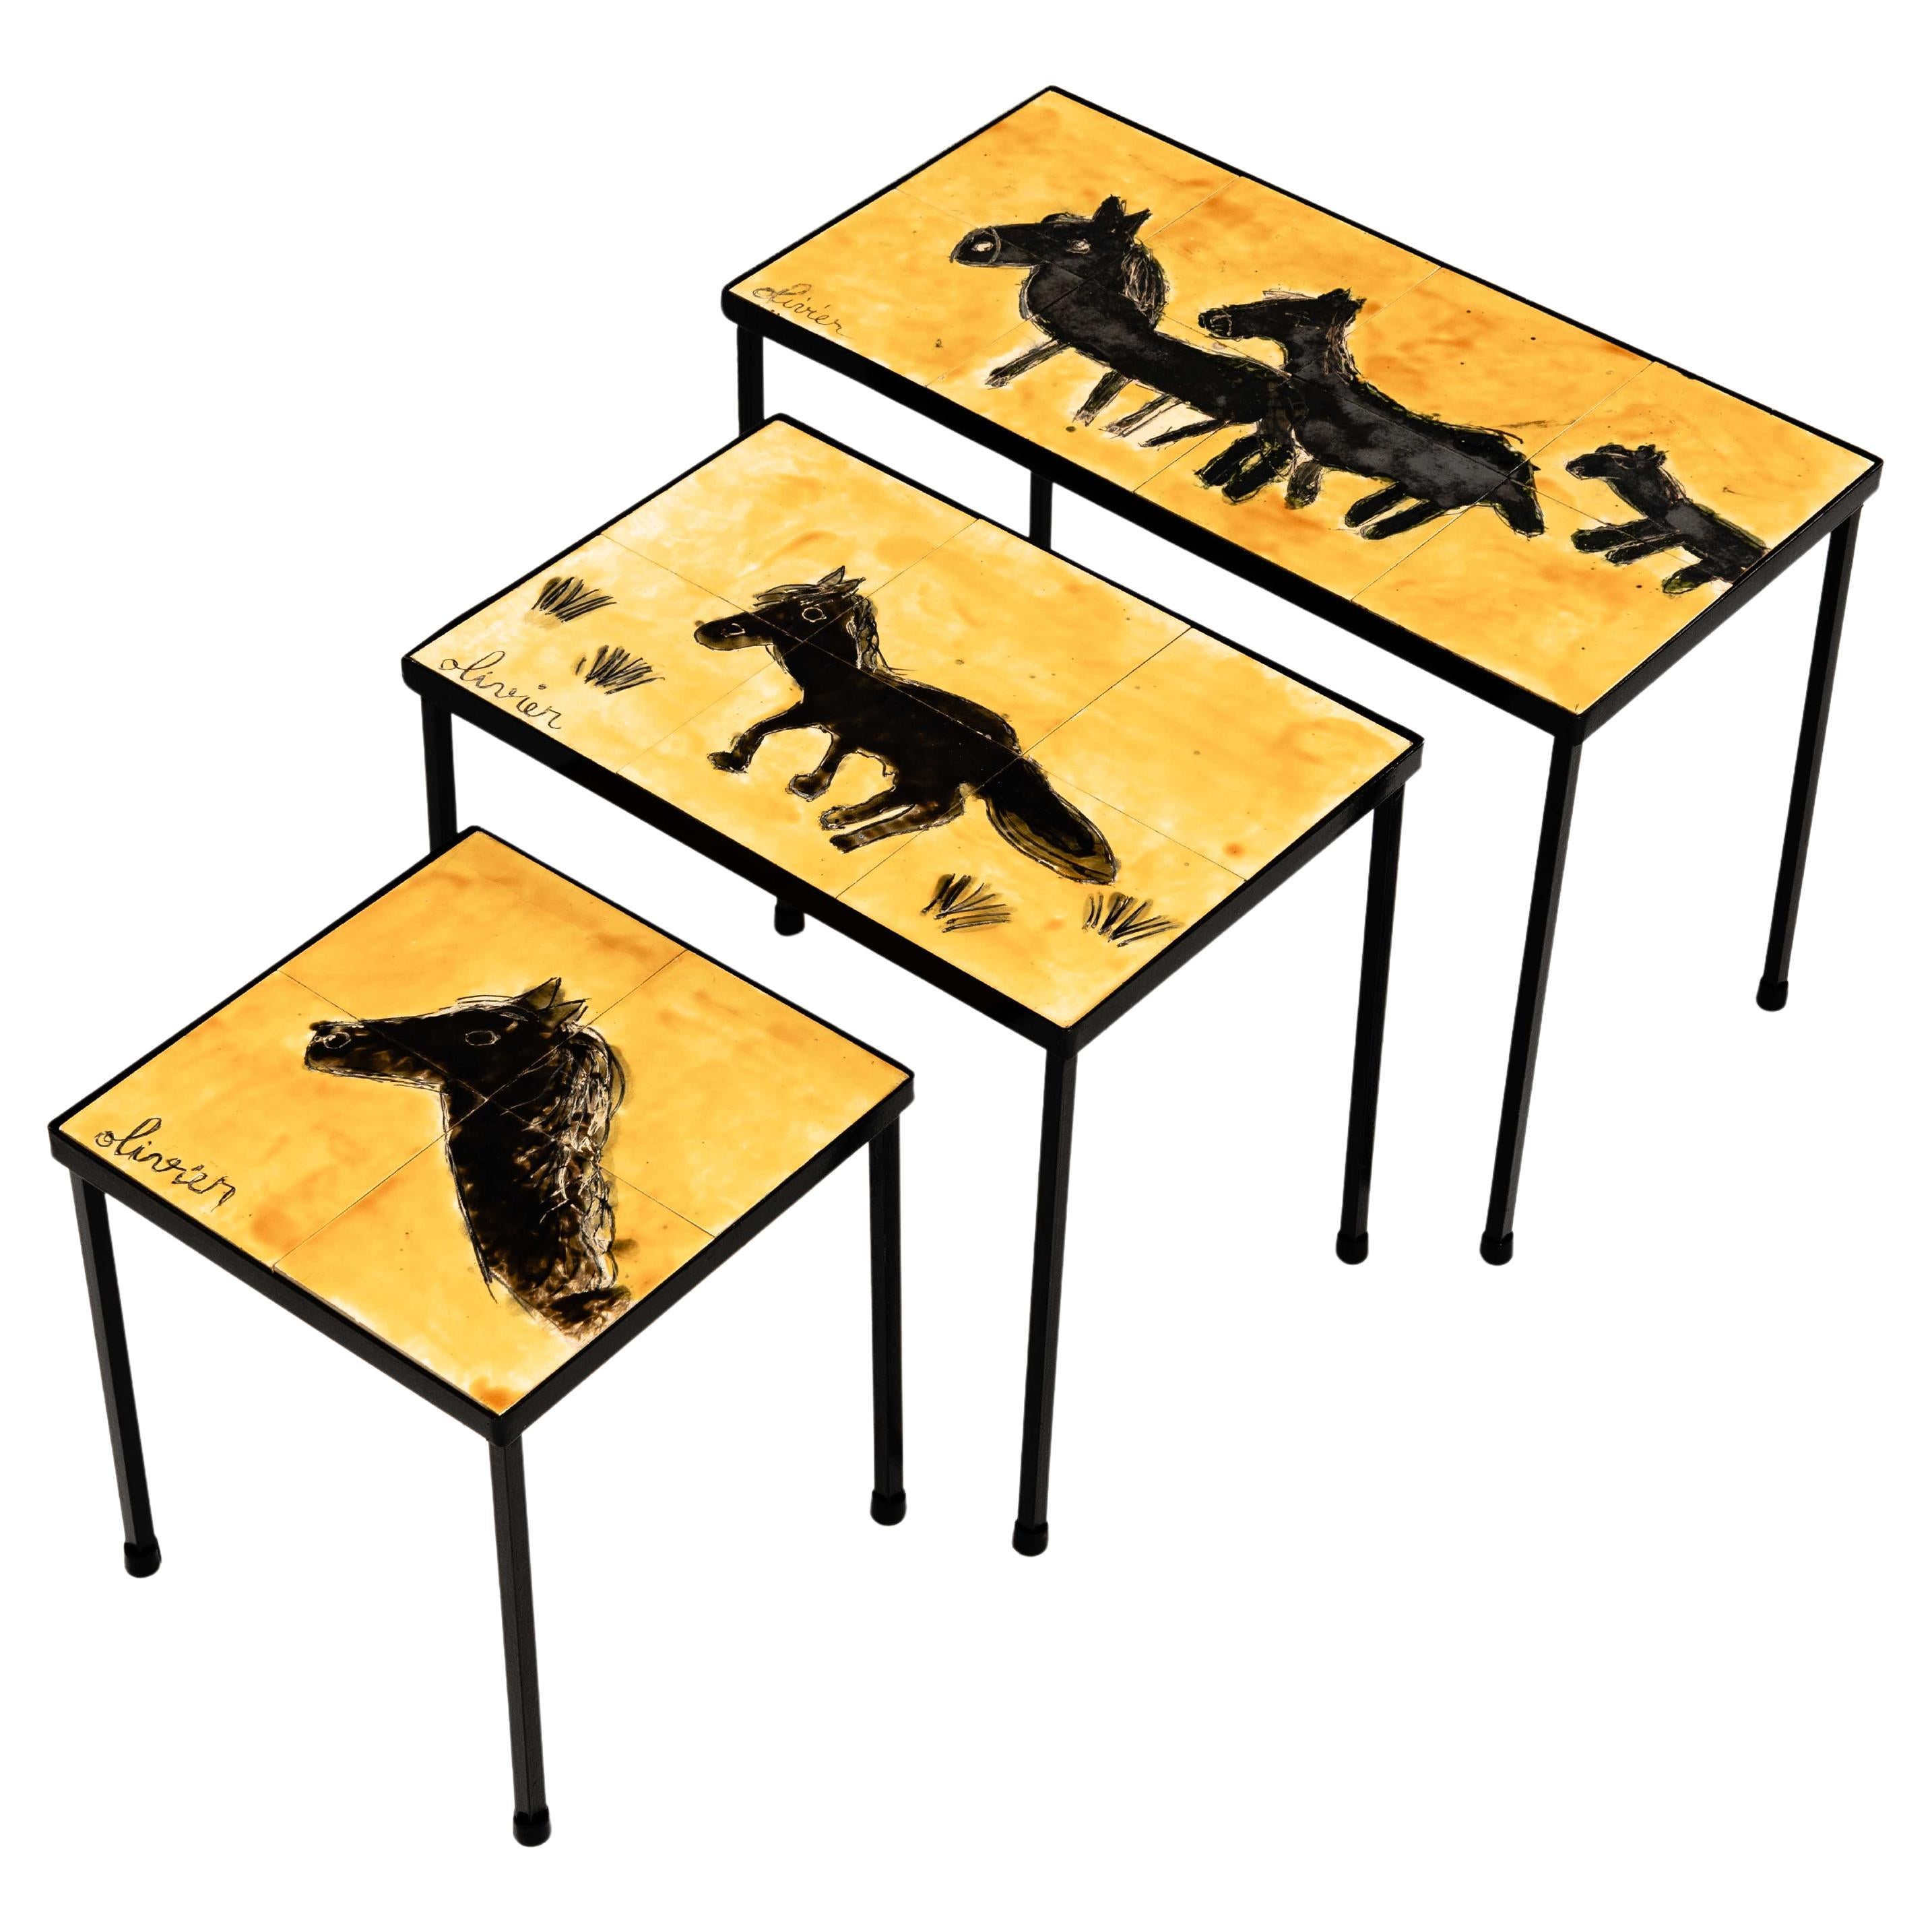 3 French Mid-Century Ceramic Nesting Tables in Yellow-Black, Signed Olivier For Sale